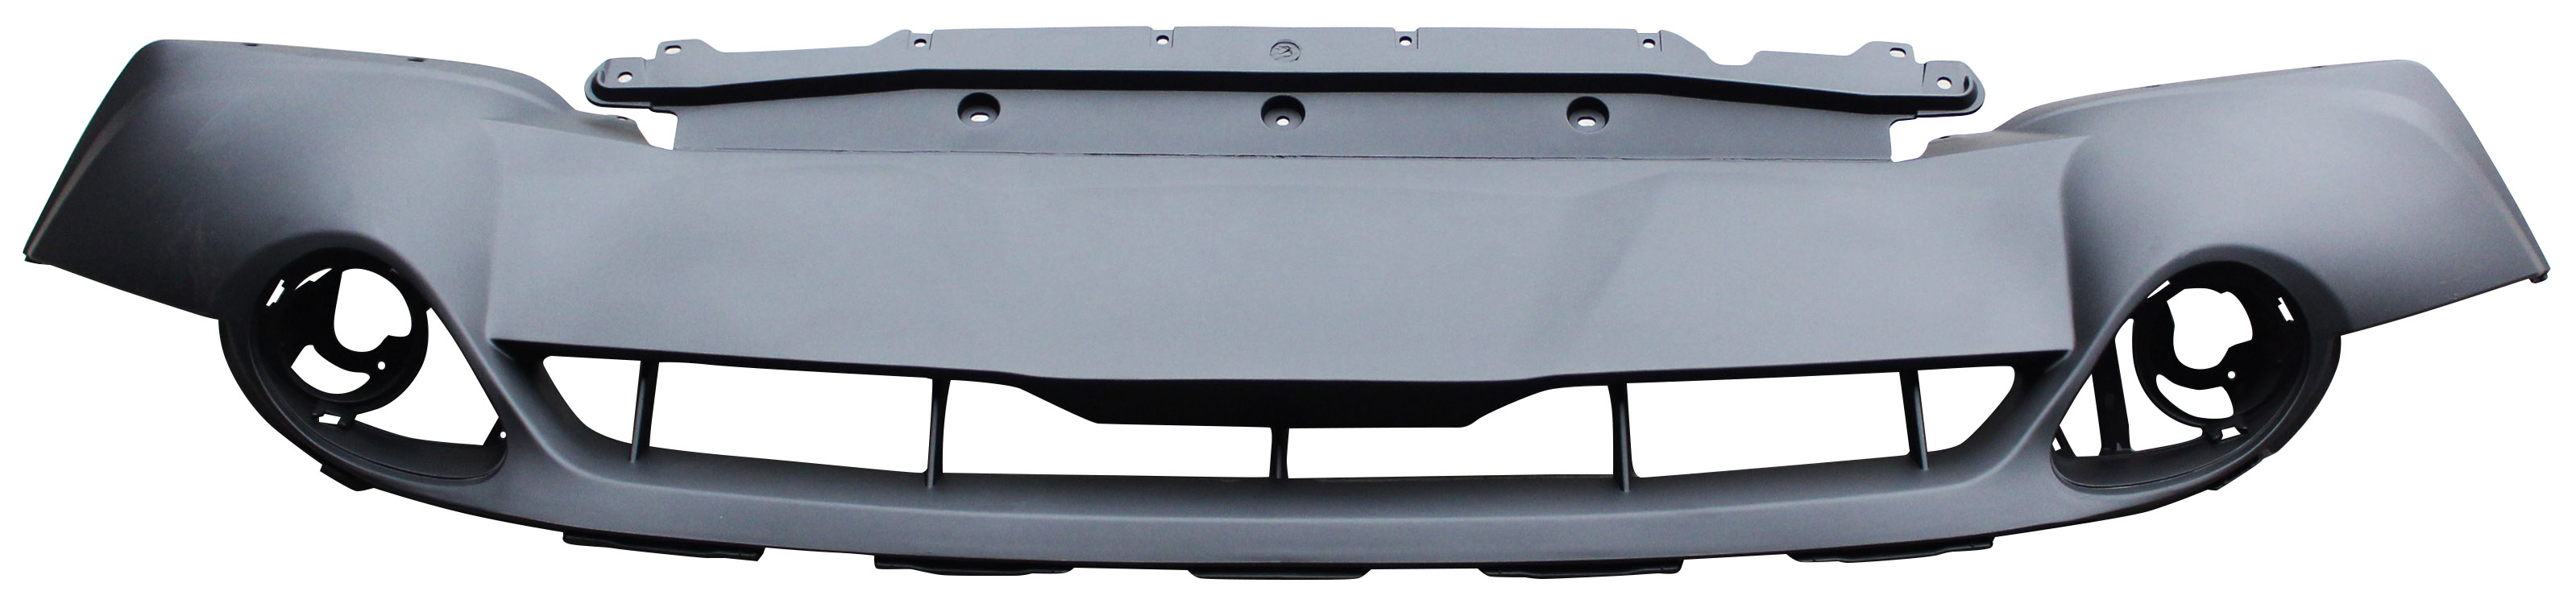 Aftermarket BUMPER COVERS for INFINITI - FX50, FX50,09-10,Front bumper cover lower